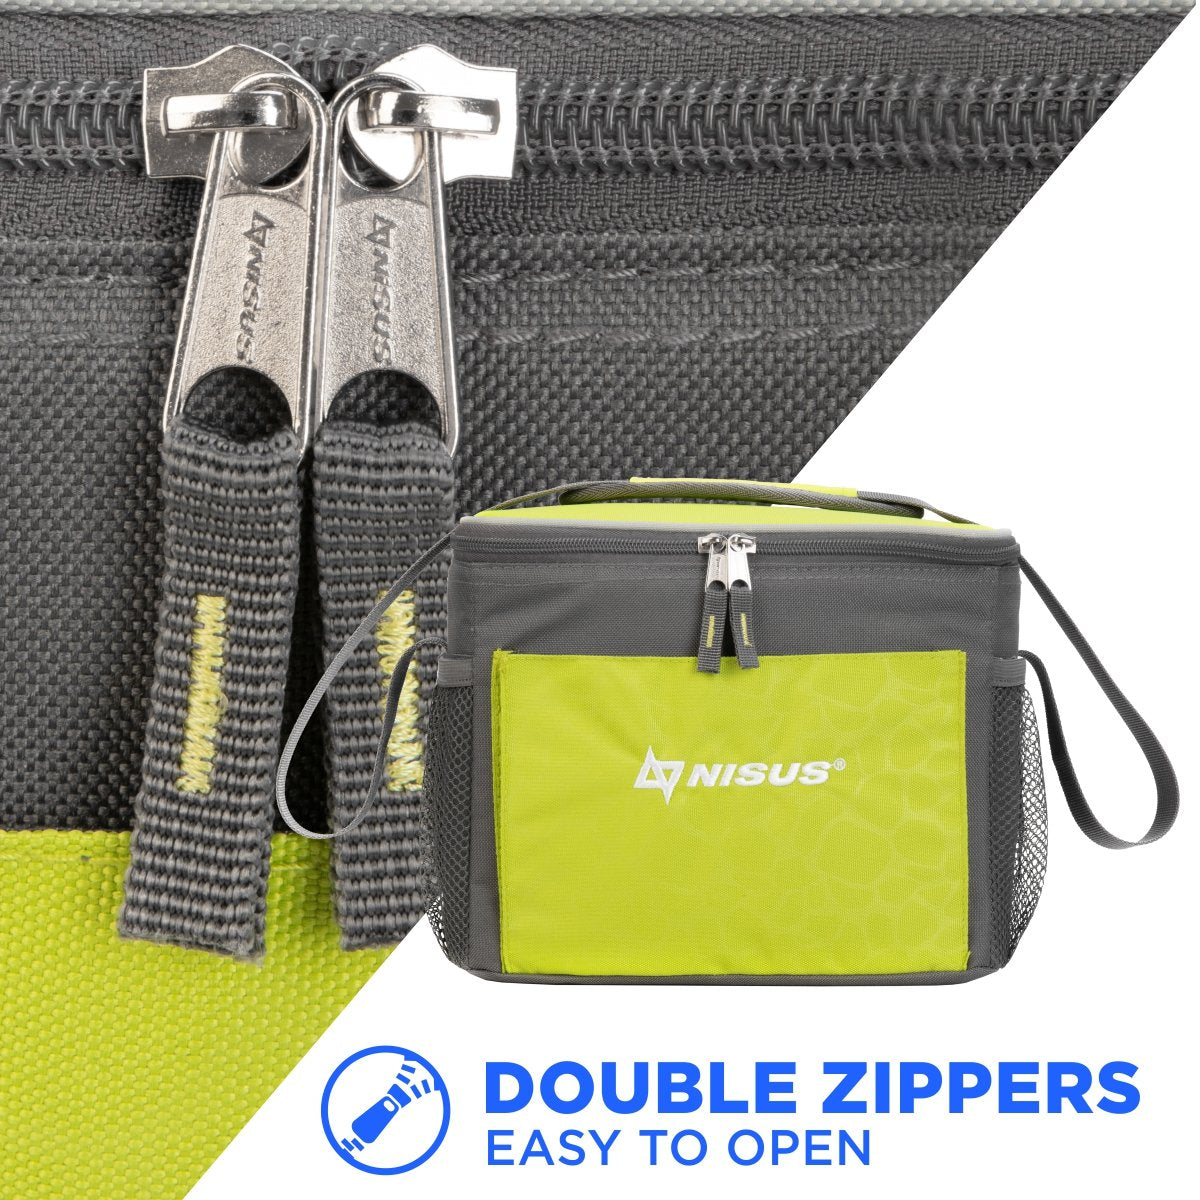 Beach Soft Sided Cooler Bag is easy to open thanks to double zippers